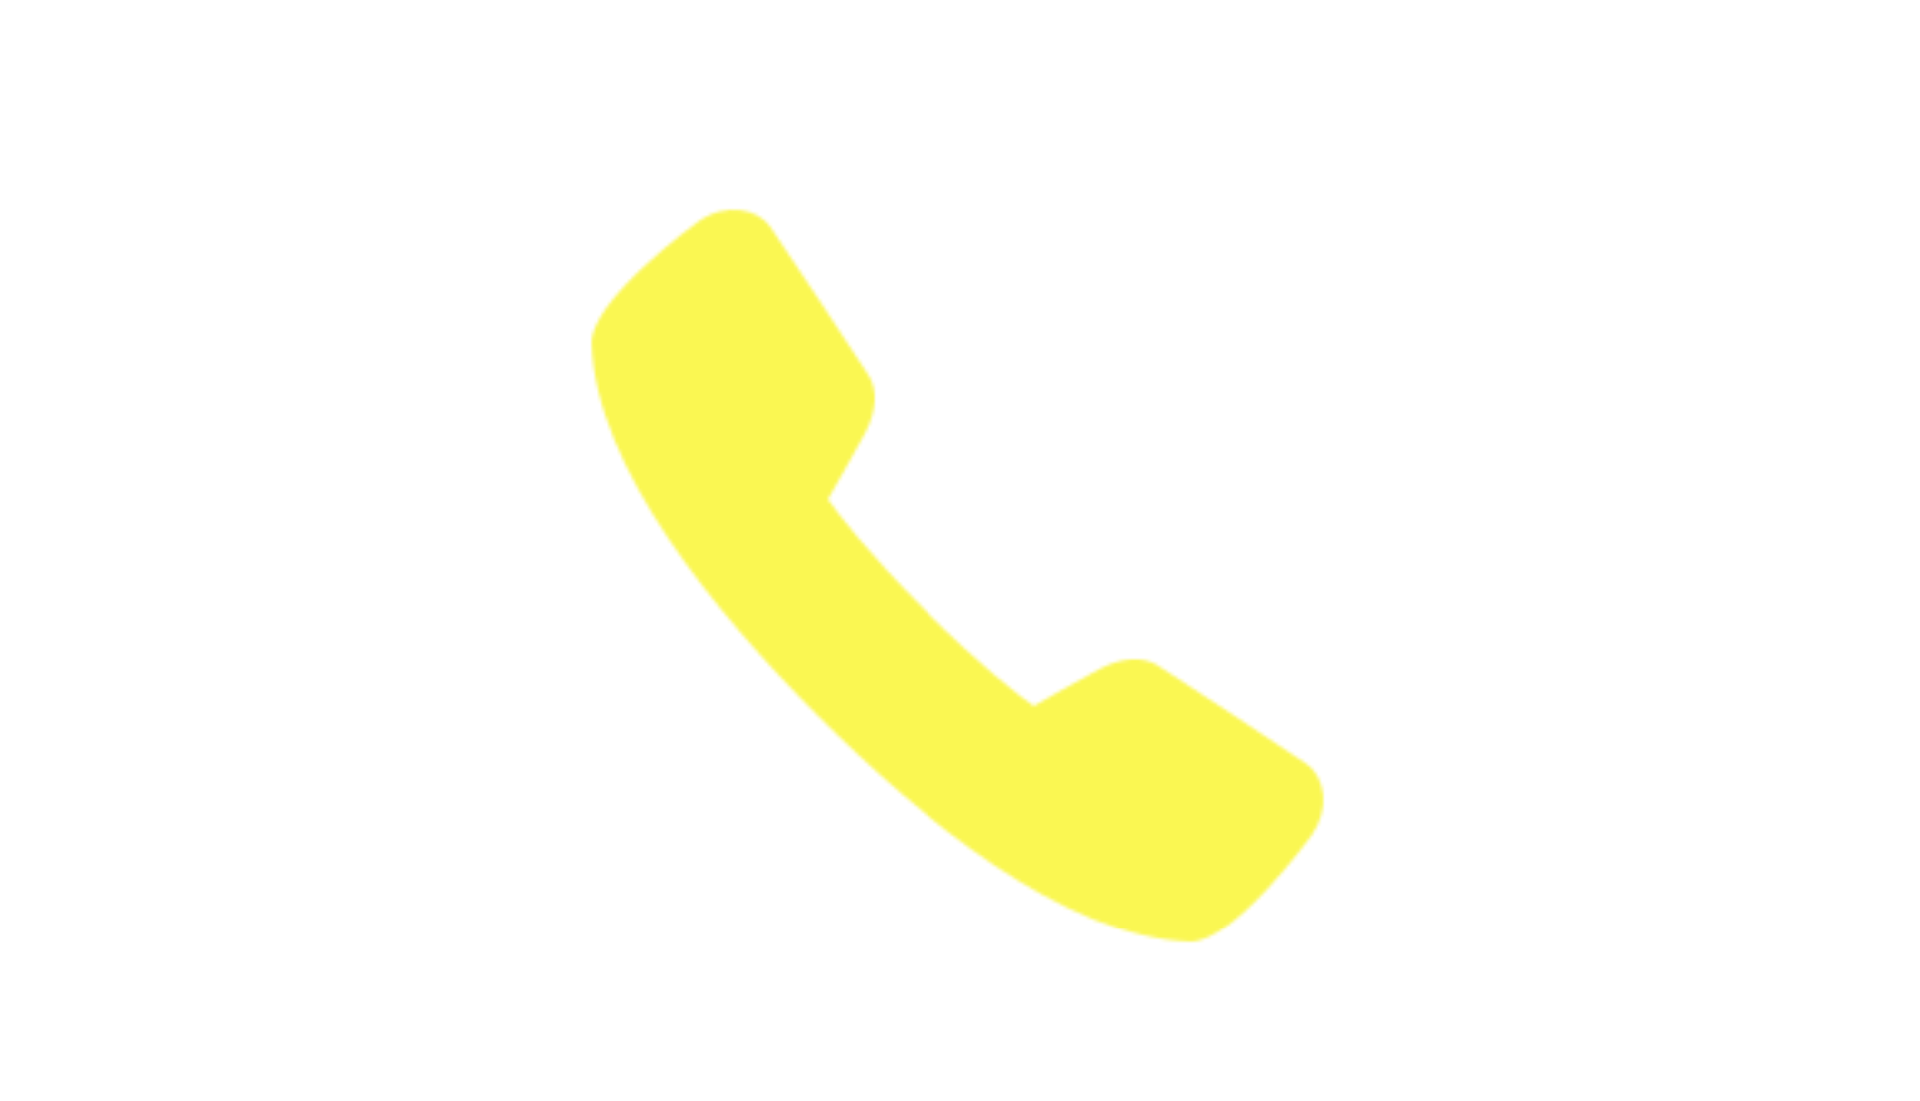 A yellow telephone icon against a white background; complete the contact us box to receive a call back from our Probate Solicitors in Preston to discuss your loved one's estate or click on the picture to visit our contact us page.